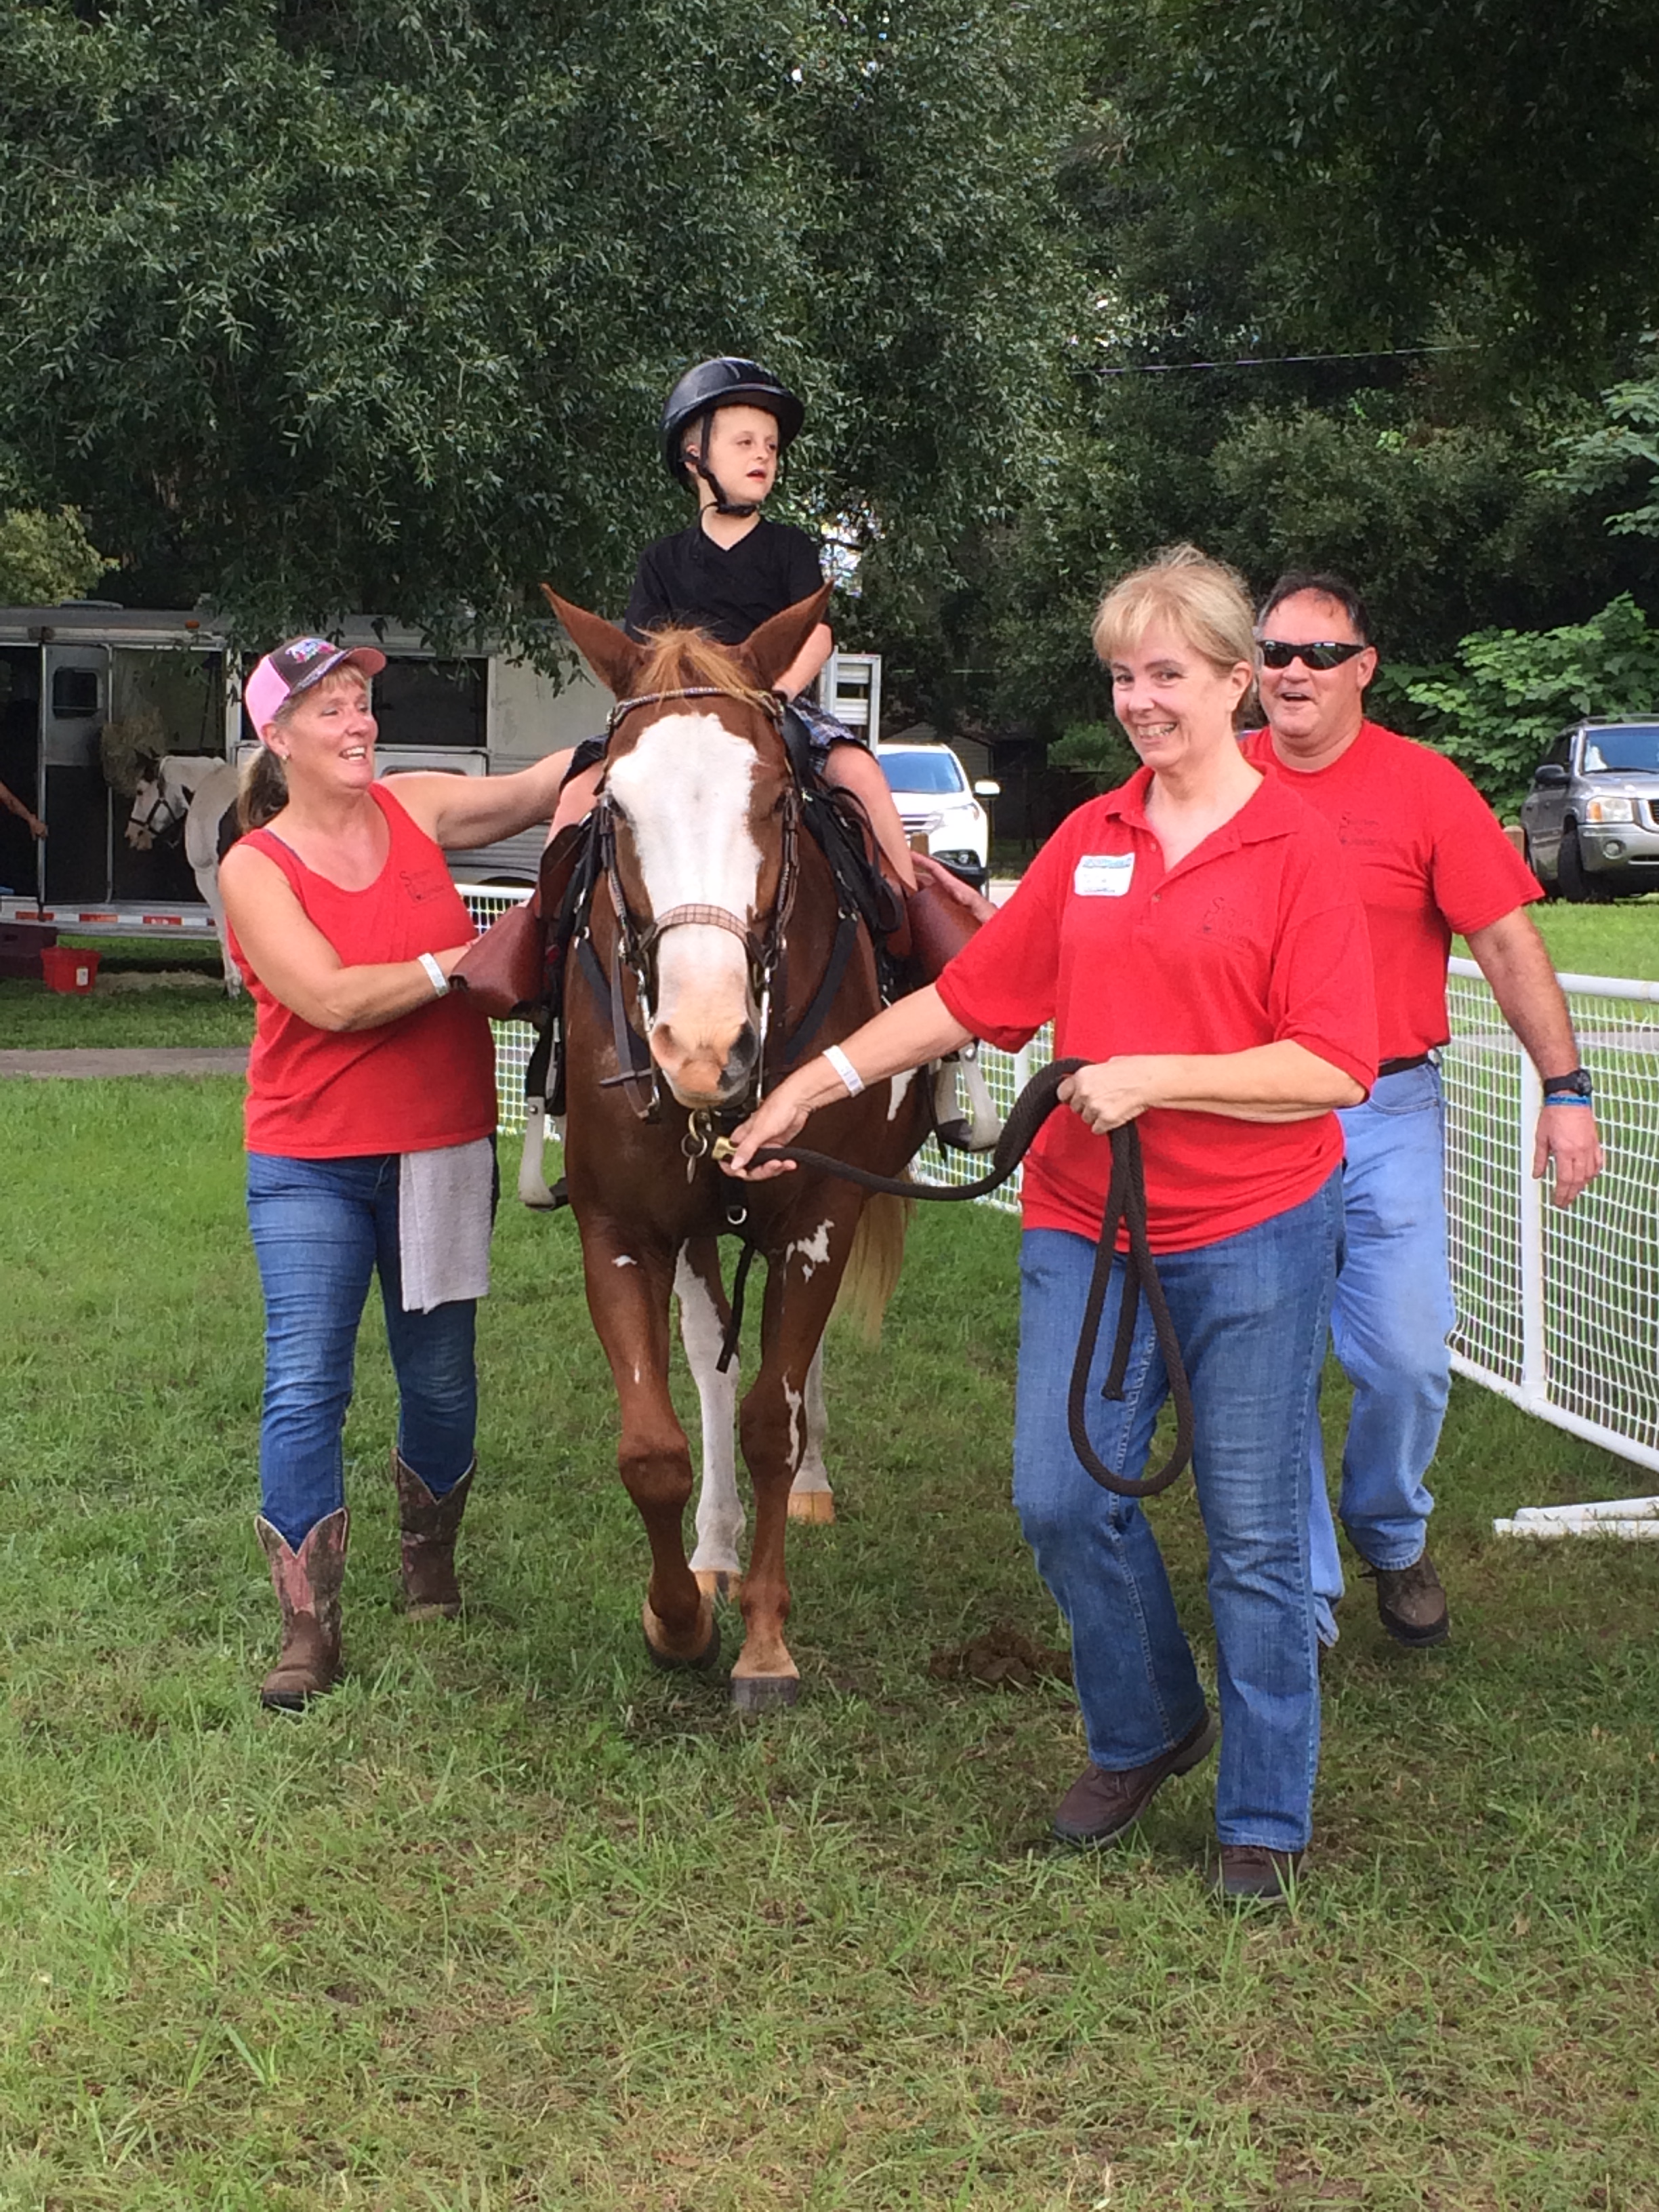 Therapeutic horseback riding was one of the many activities.